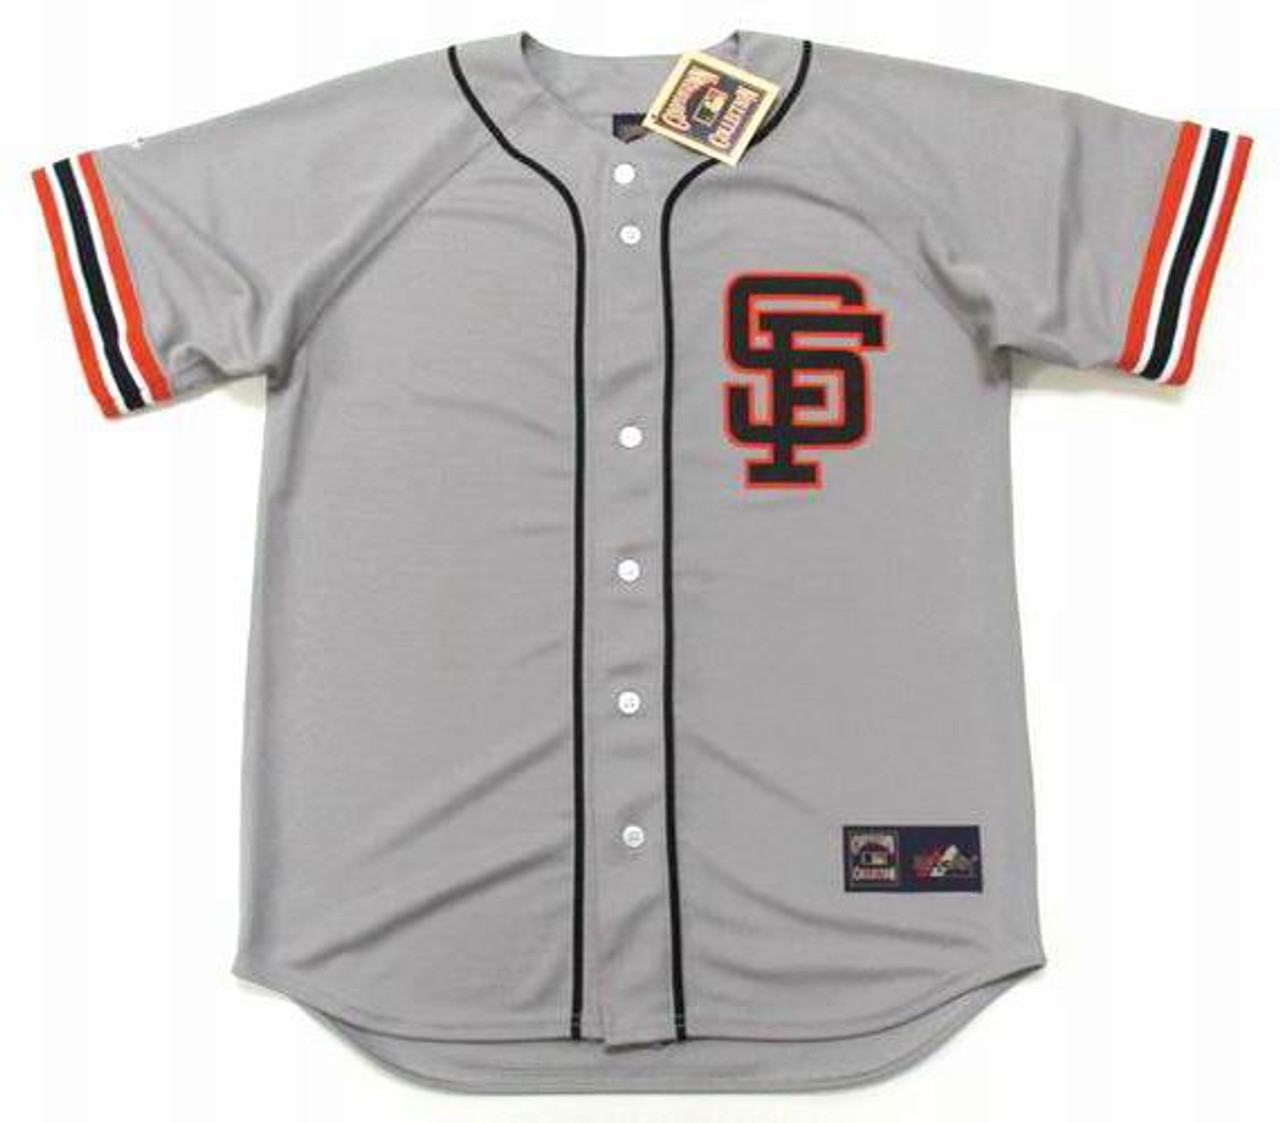 SF Giants road throwback jersey is HOT!